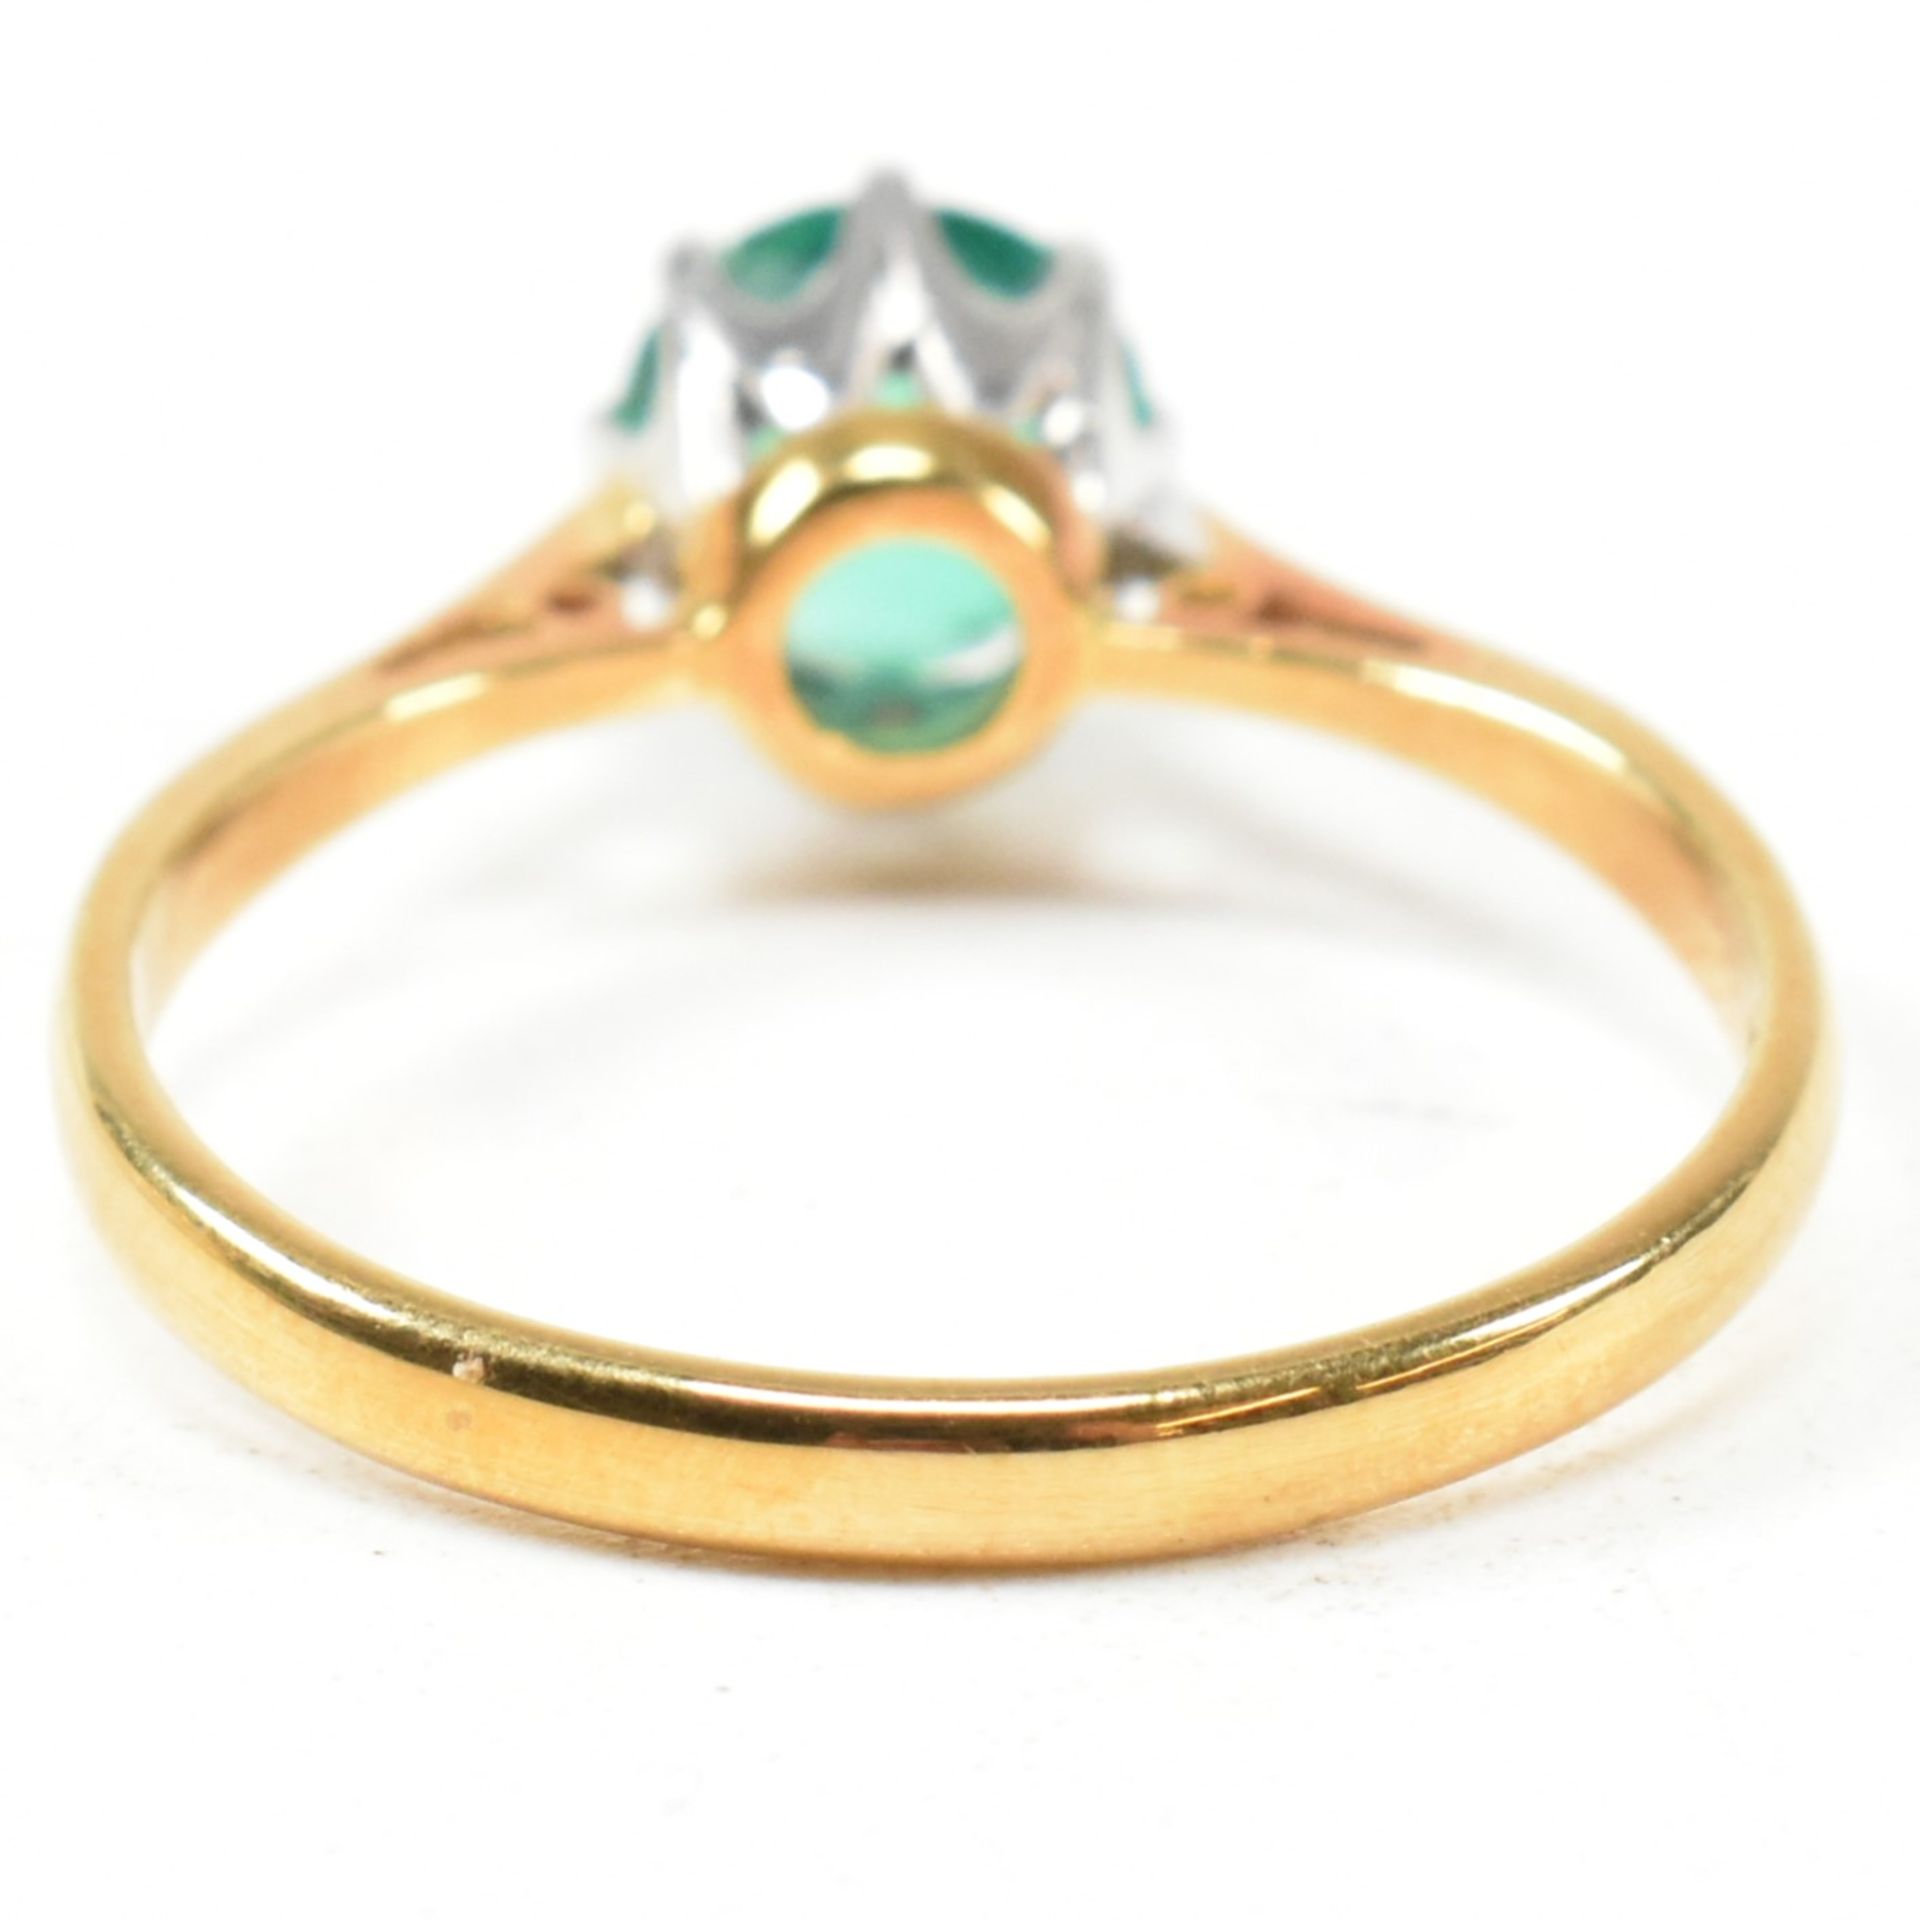 HALLMARKED 18CT GOLD & EMERALD SOLITAIRE RING - Image 3 of 10